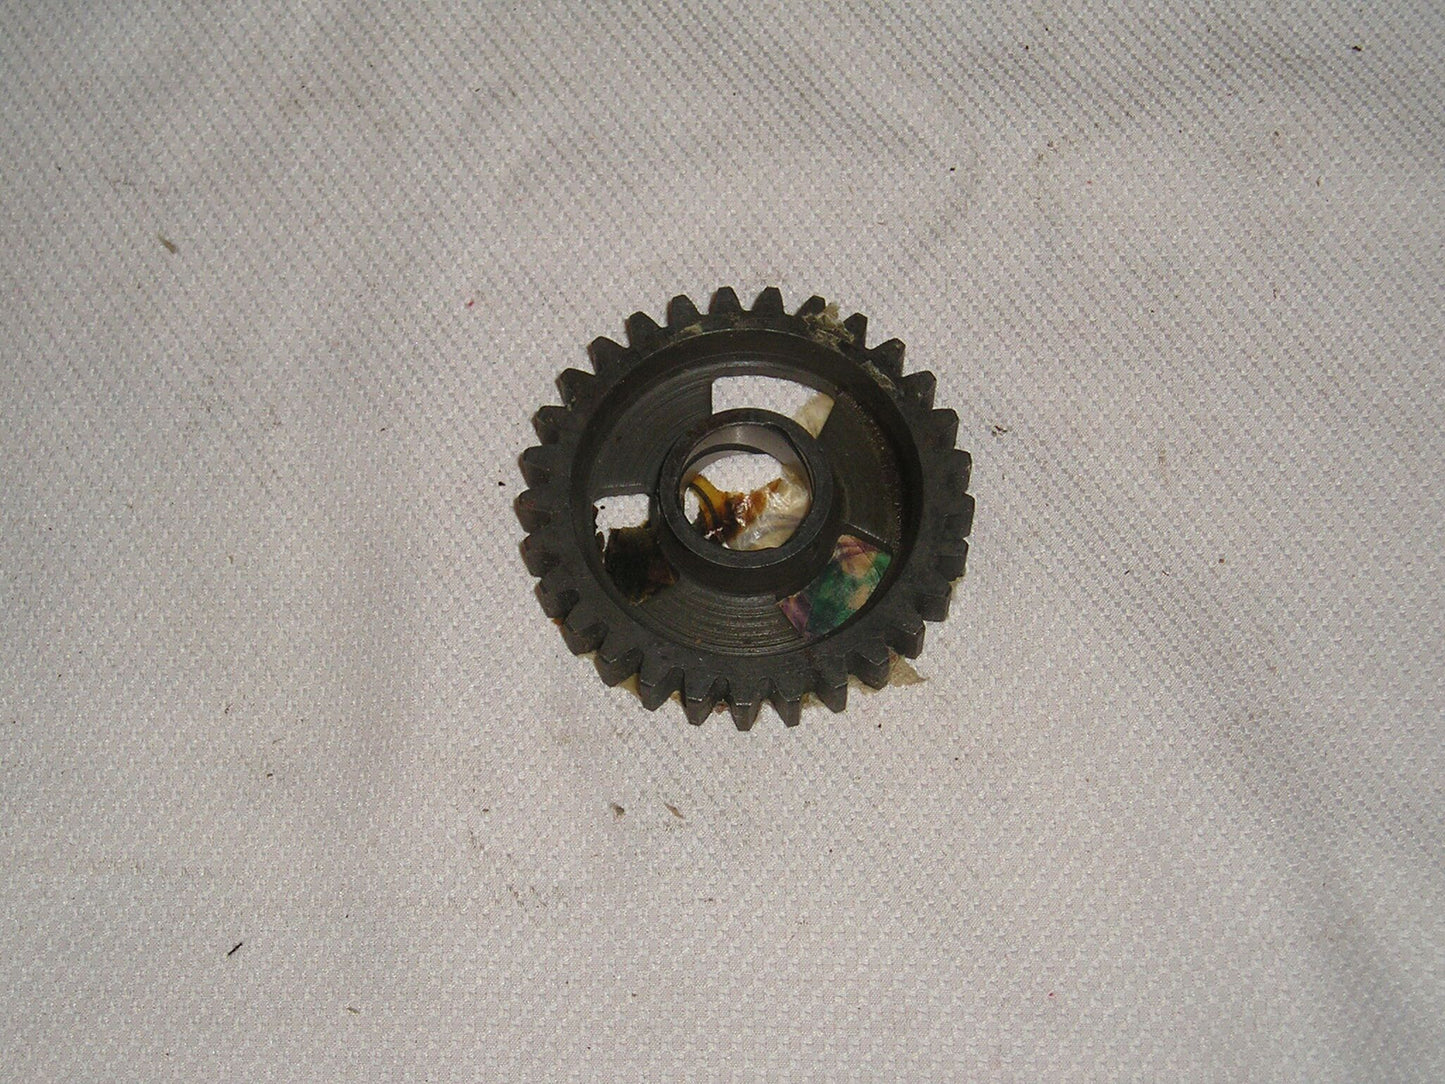 PUCH SEARS ALLSTATE MOPED TWINGLE Transmission Gear 29T  (B)